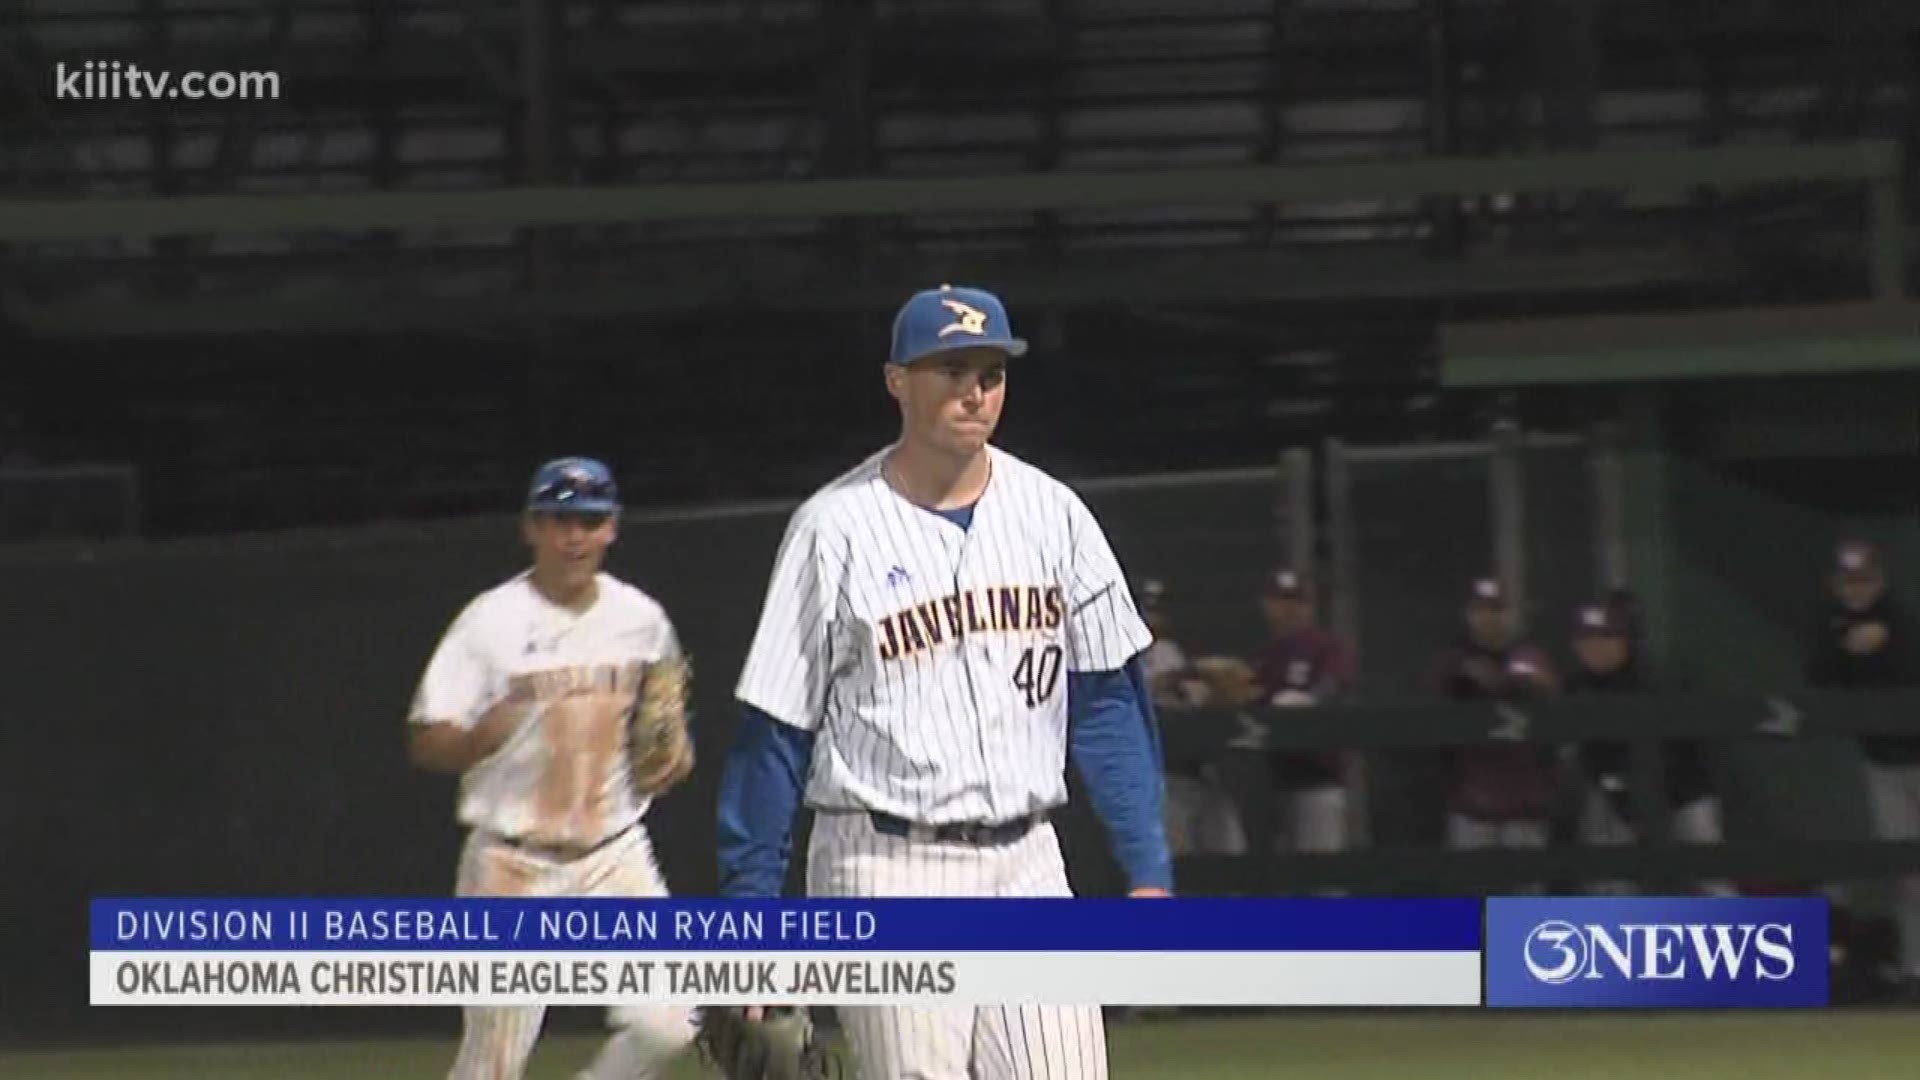 Texas A&M-Kingsville baseball opened the season with a 3-1 win over Oklahoma Christian powered by a big 5th inning.